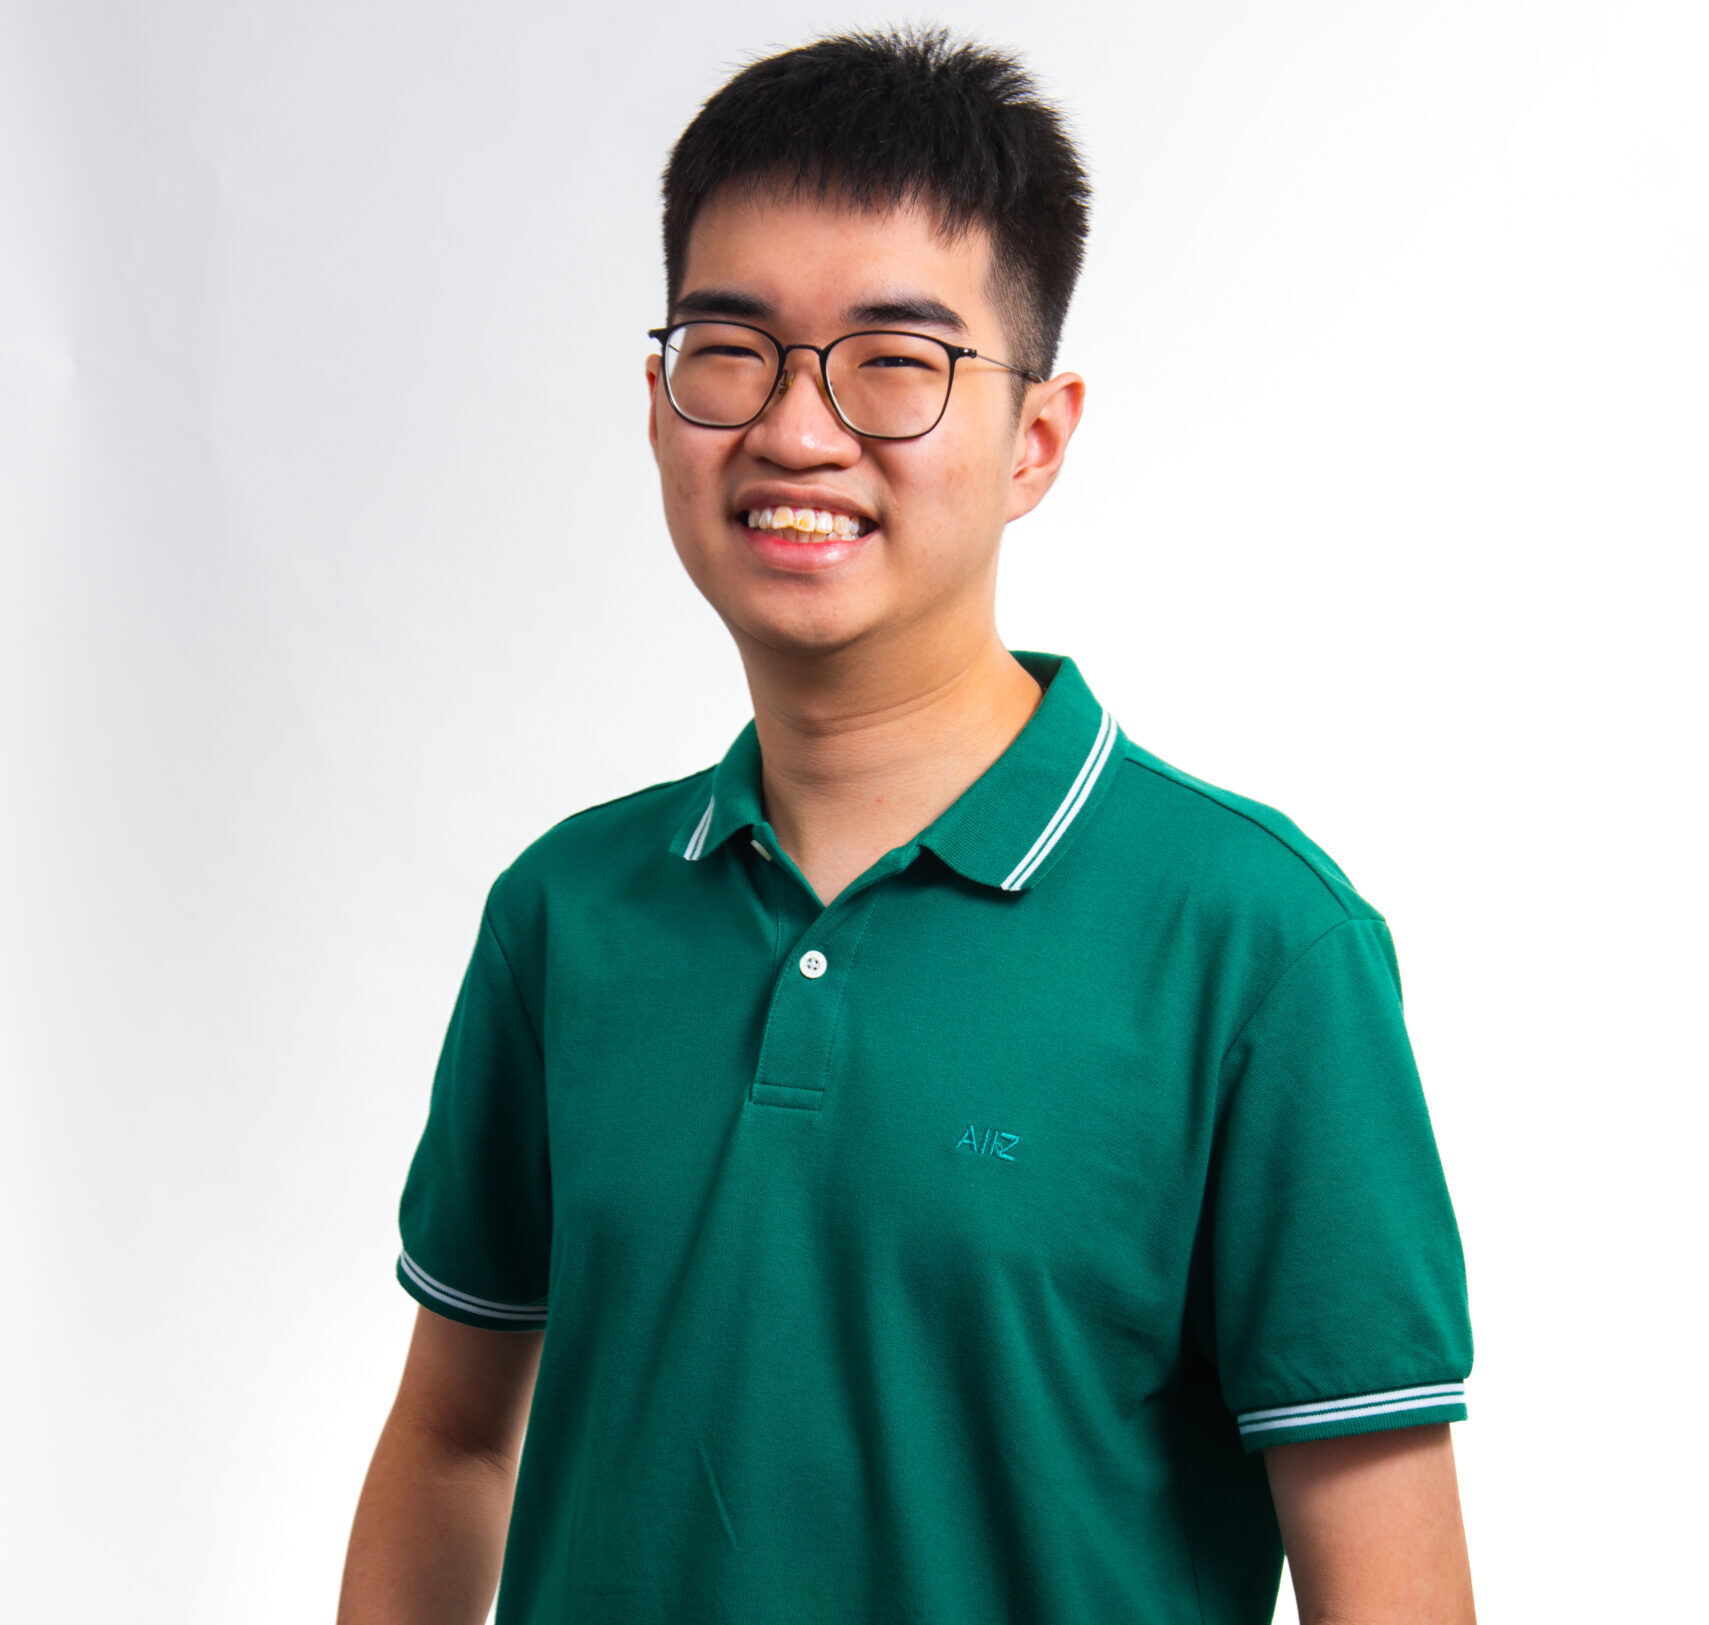 Meet Yong Lam – Winner of the Lijen Industrial Development Medal, Ho Family Prize, and Tan Teck Chwee Prize